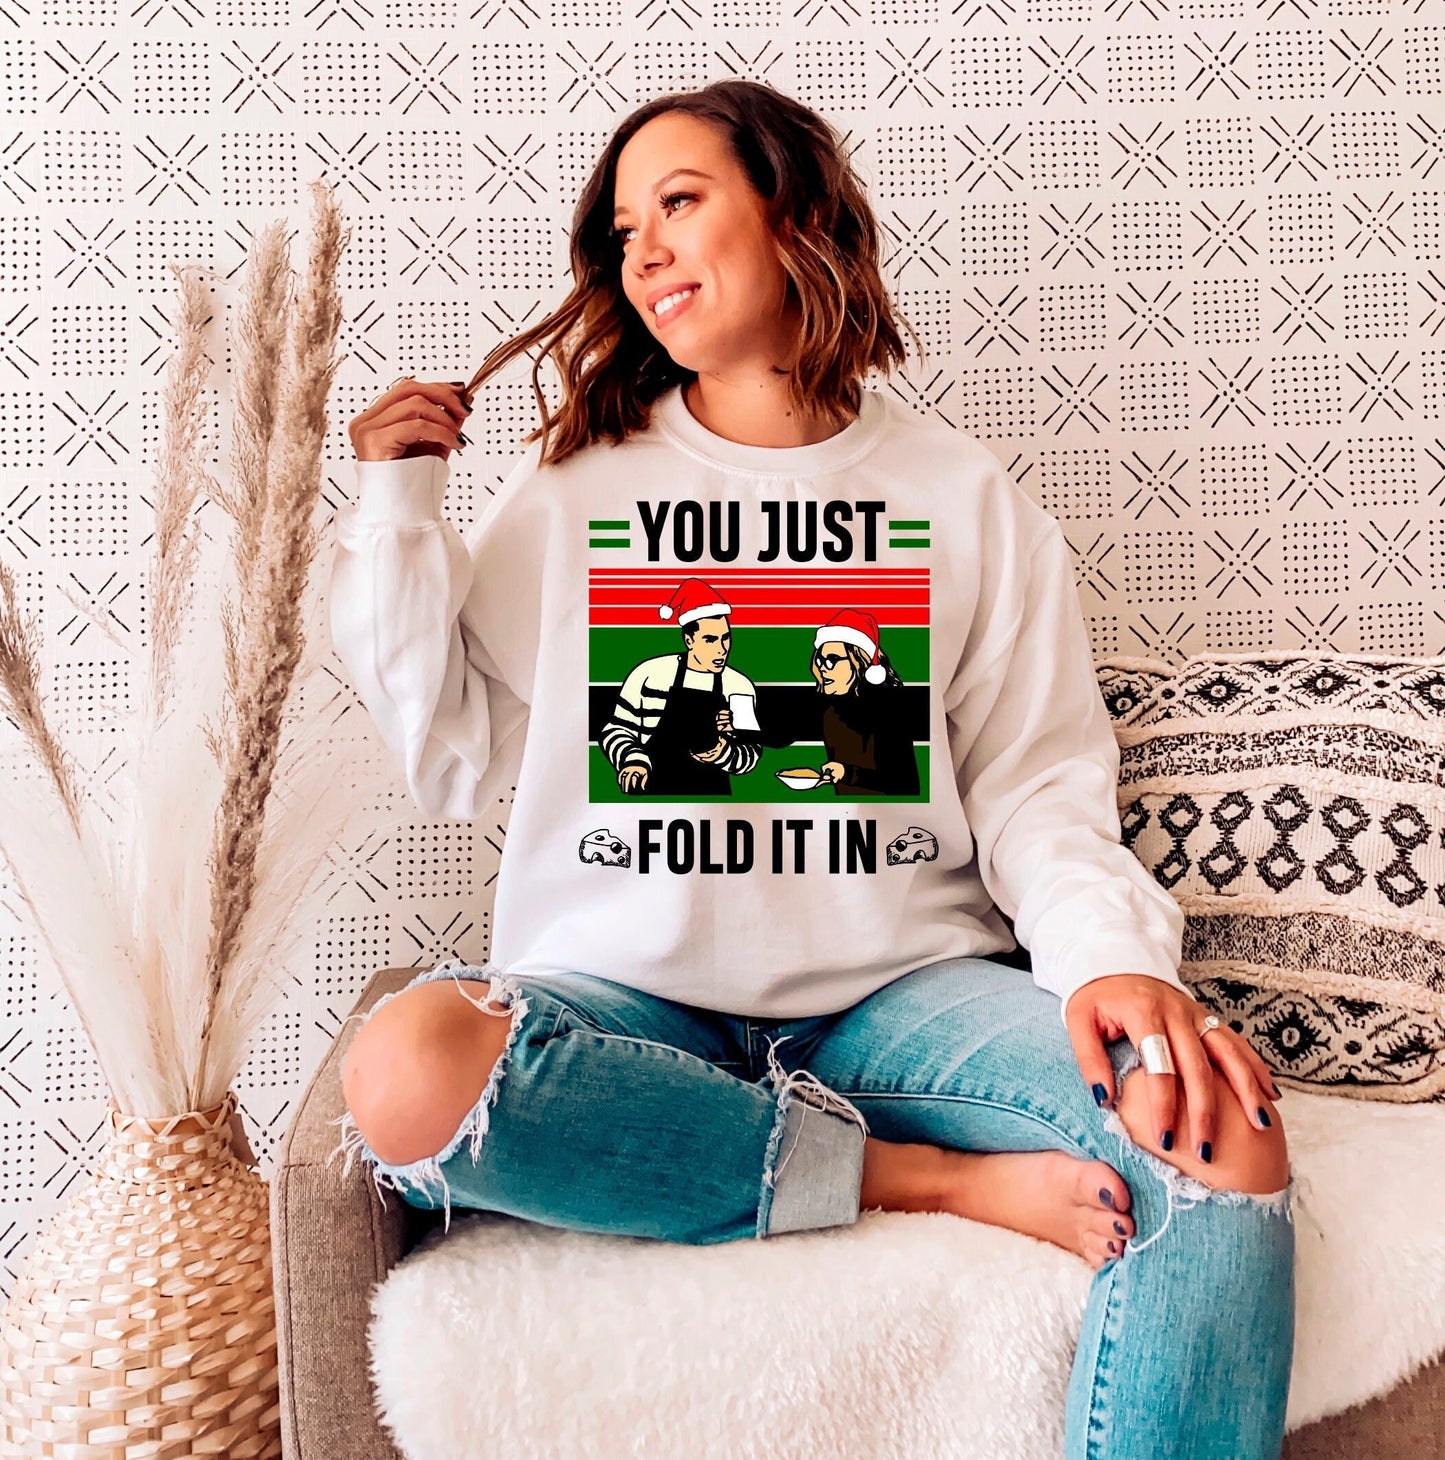 You just fold it in Sweatshirt, Funny Christmas Sweater, Ugly Christmas Sweater, Holiday Sweater, Matching Christmas Sweater, fall apparel